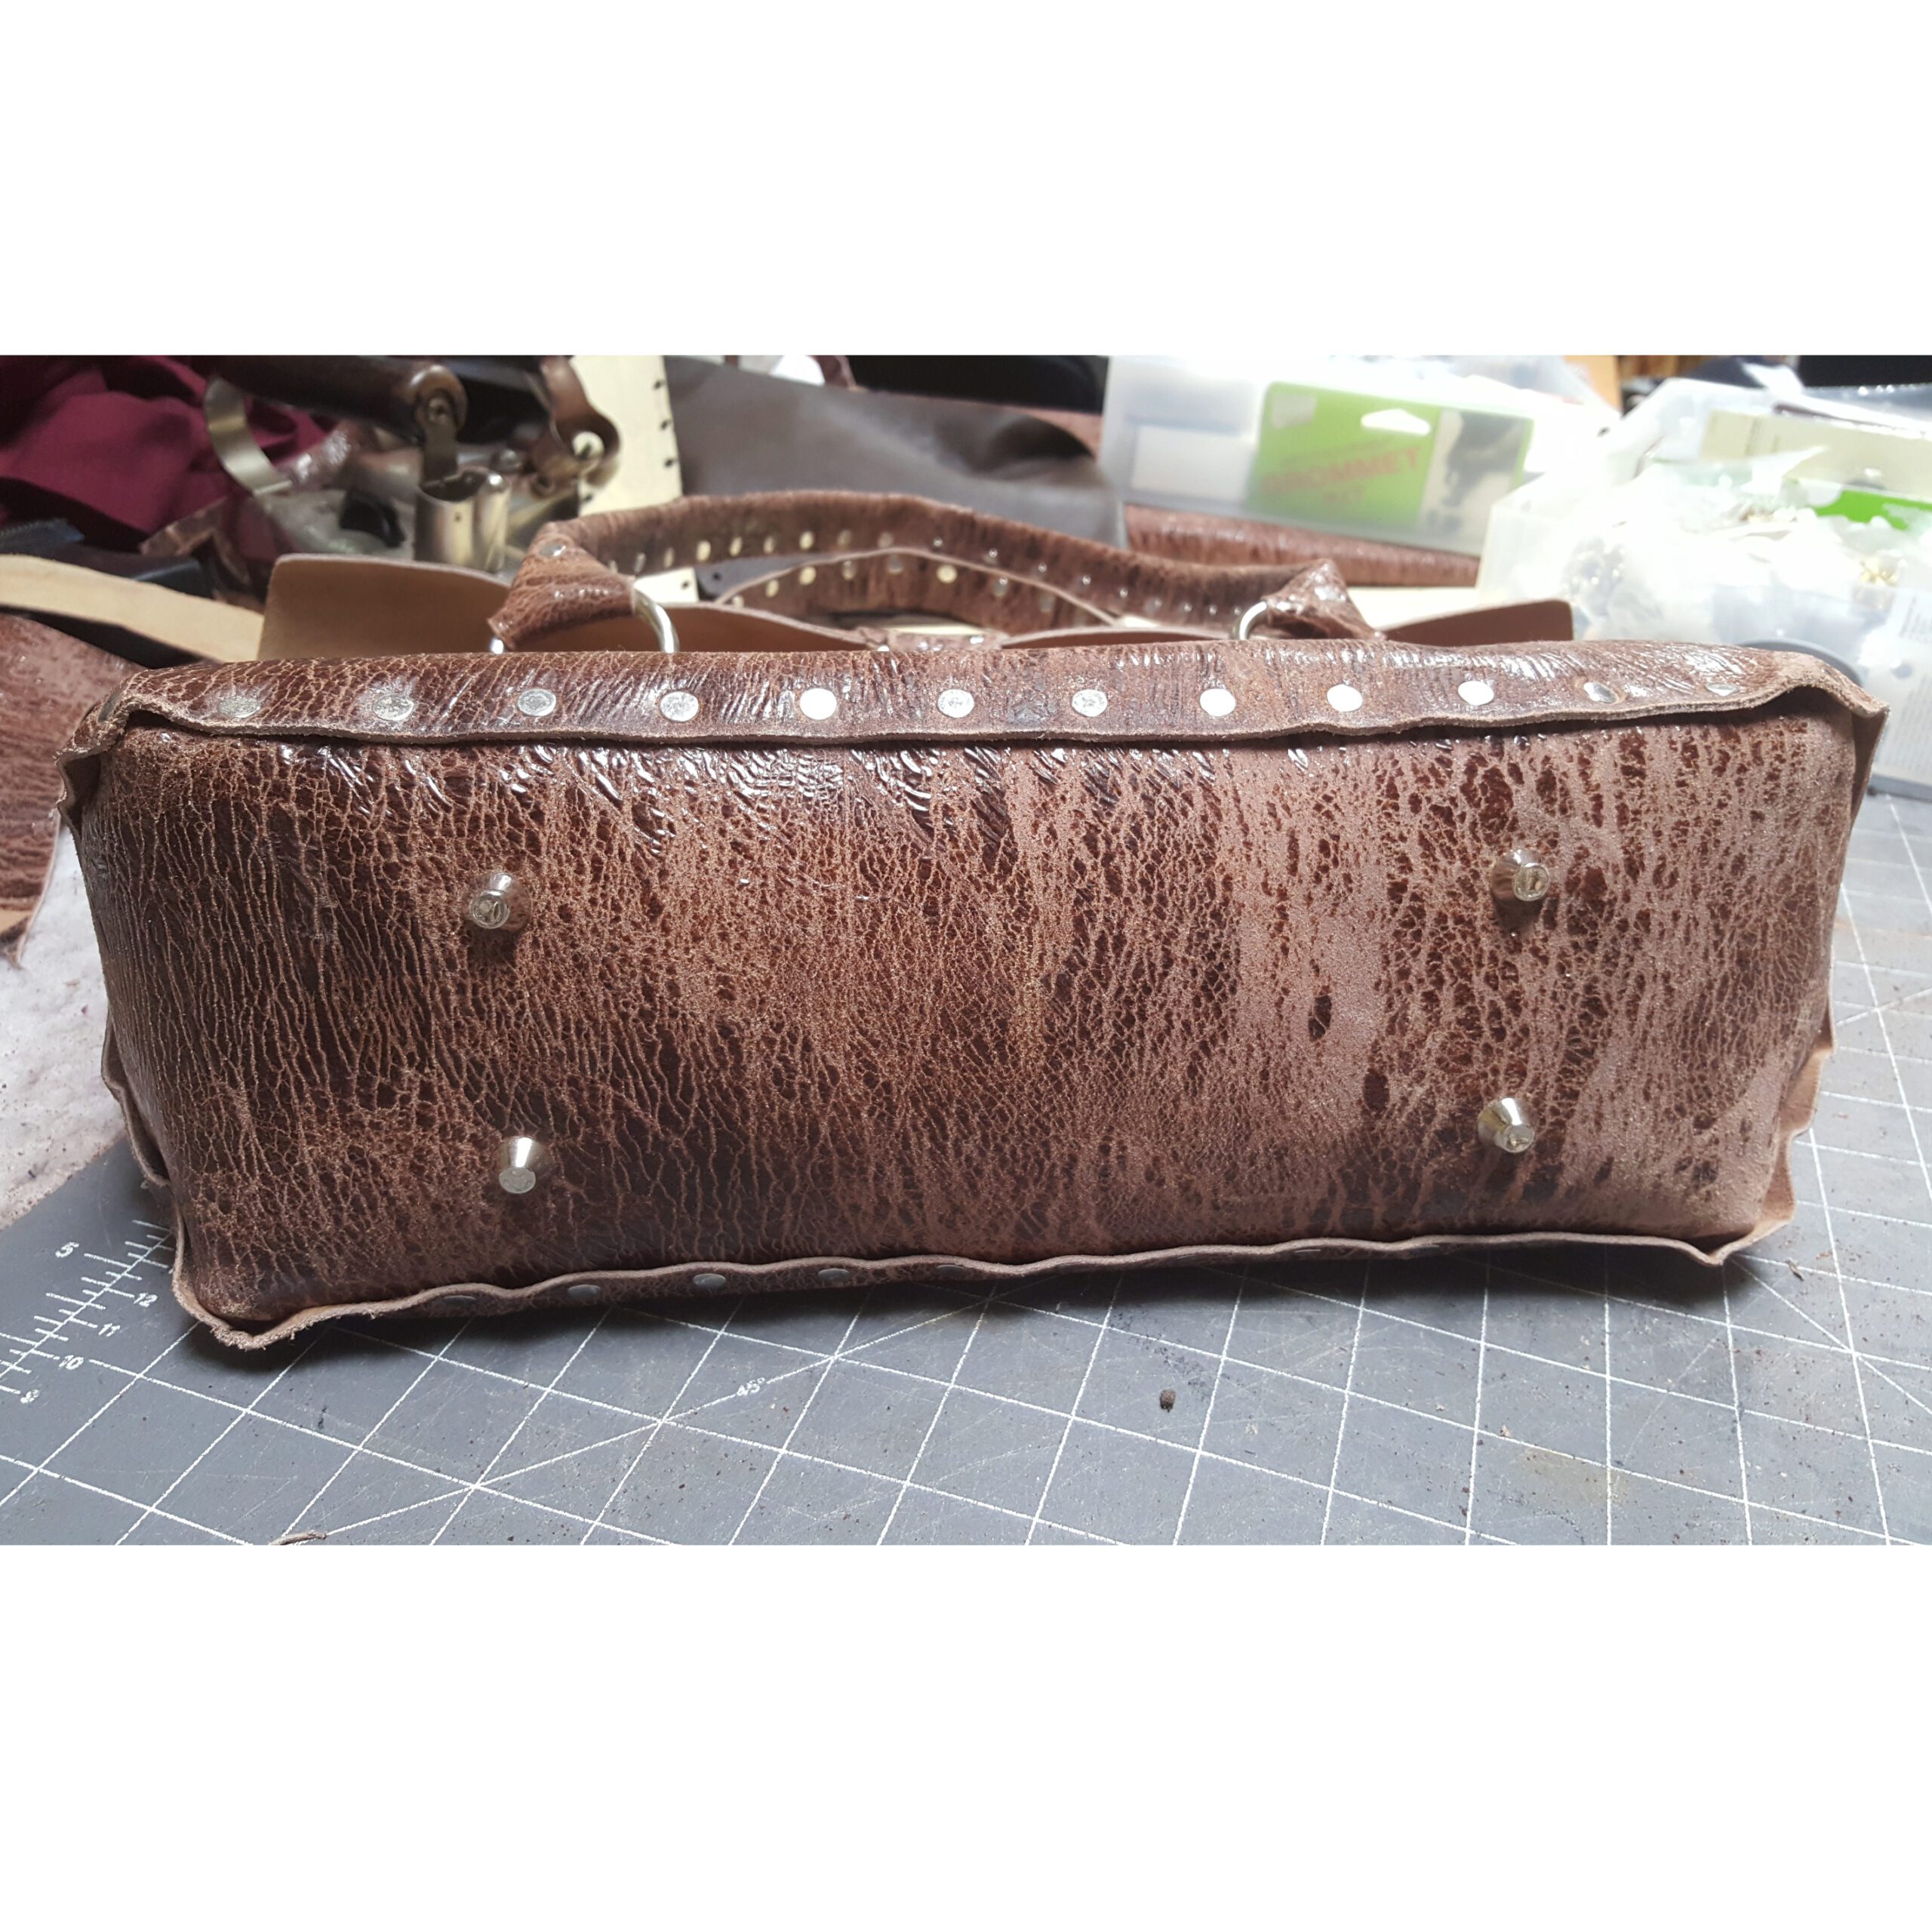 Distressed brown leather cowhide purse